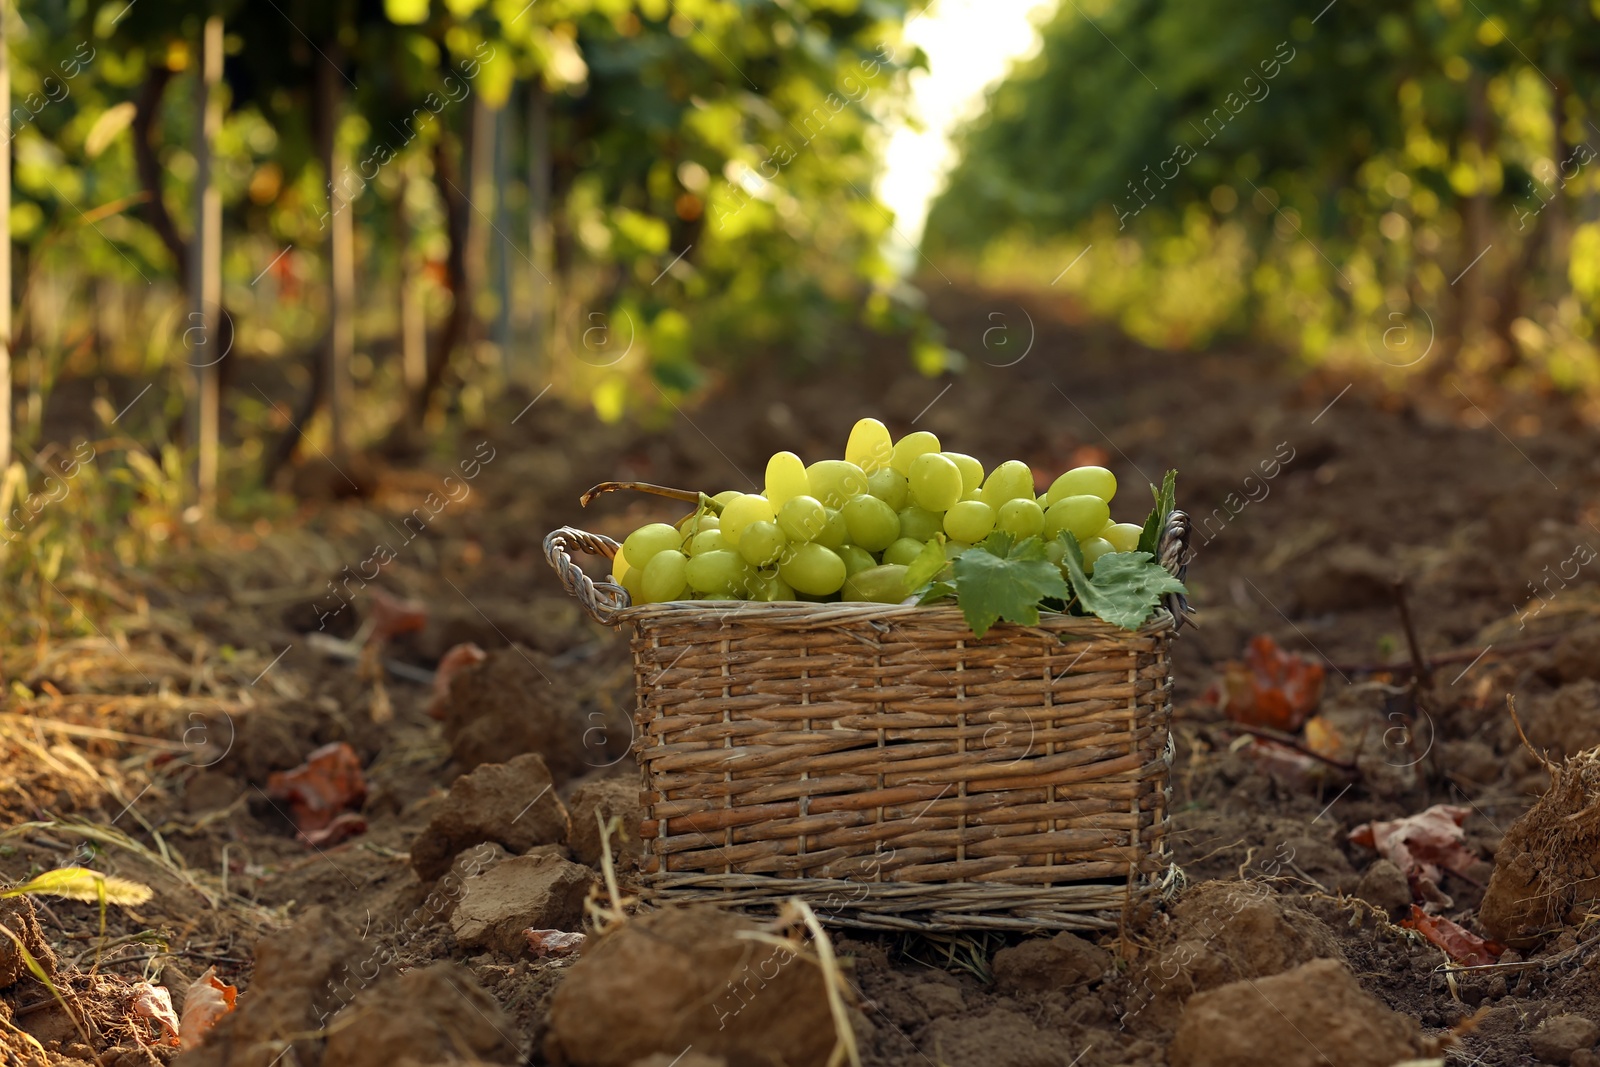 Photo of Basket with fresh ripe juicy grapes on ground in vineyard